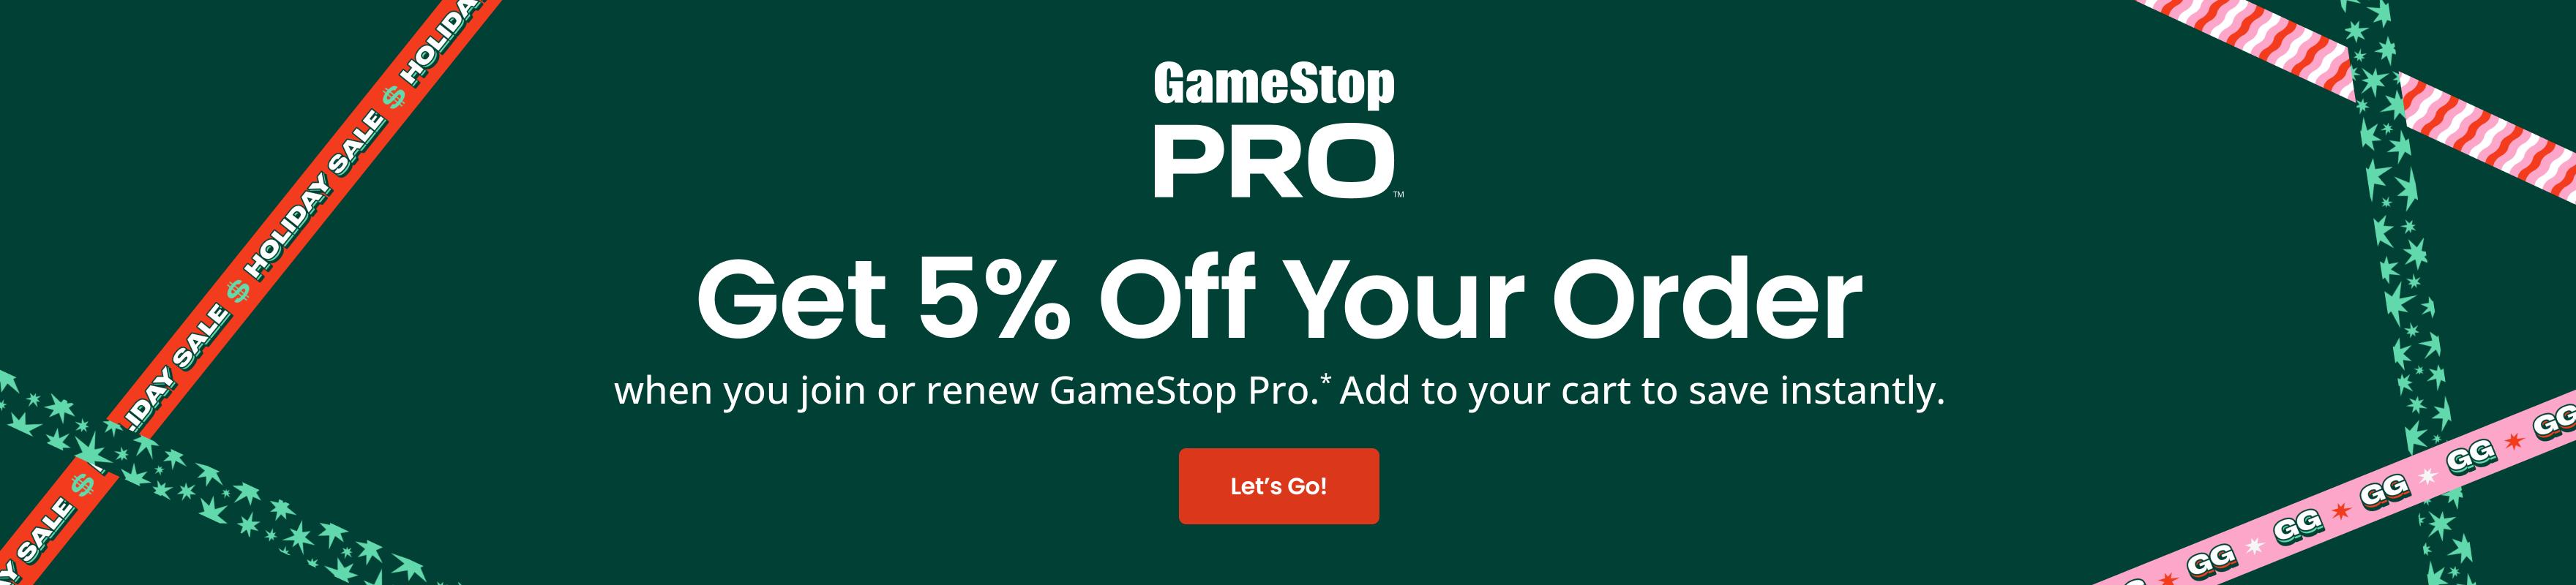 Get 5% Off Your Order When You Join Or Renew GameStop Pro!*